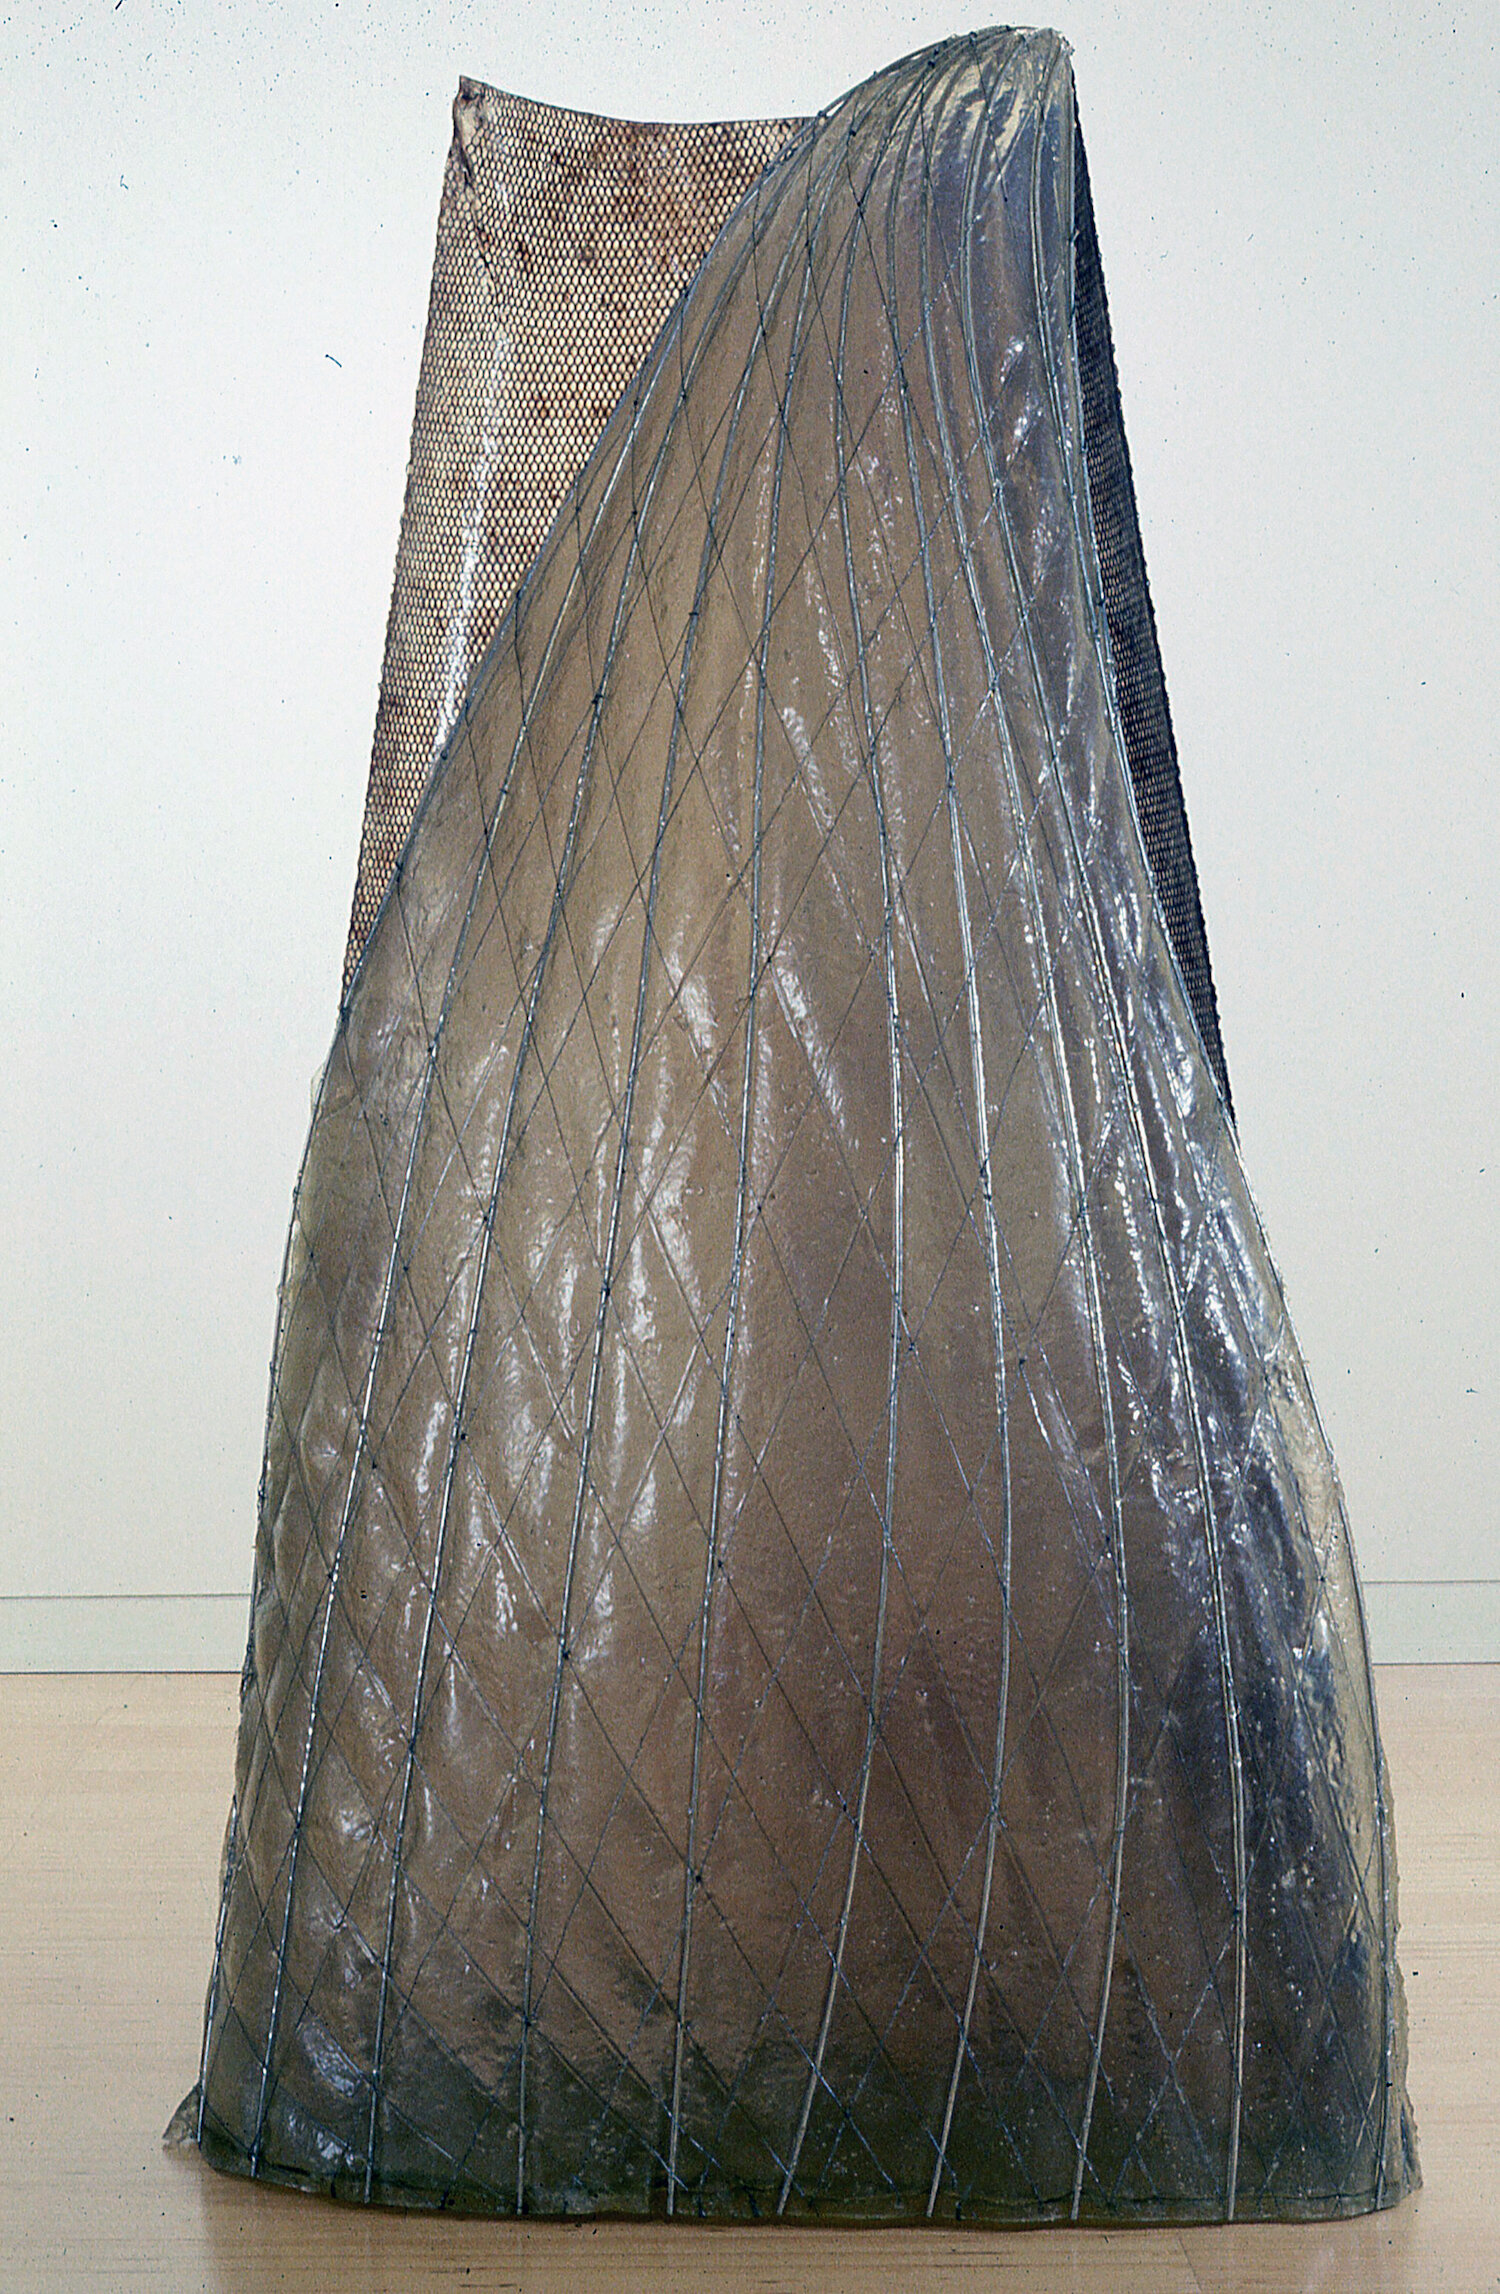  Fleece (1987), polyester resin, pigment, steel mesh, 73 x 23 x 45 inches (1.8 x .5 x 1.09 m) 